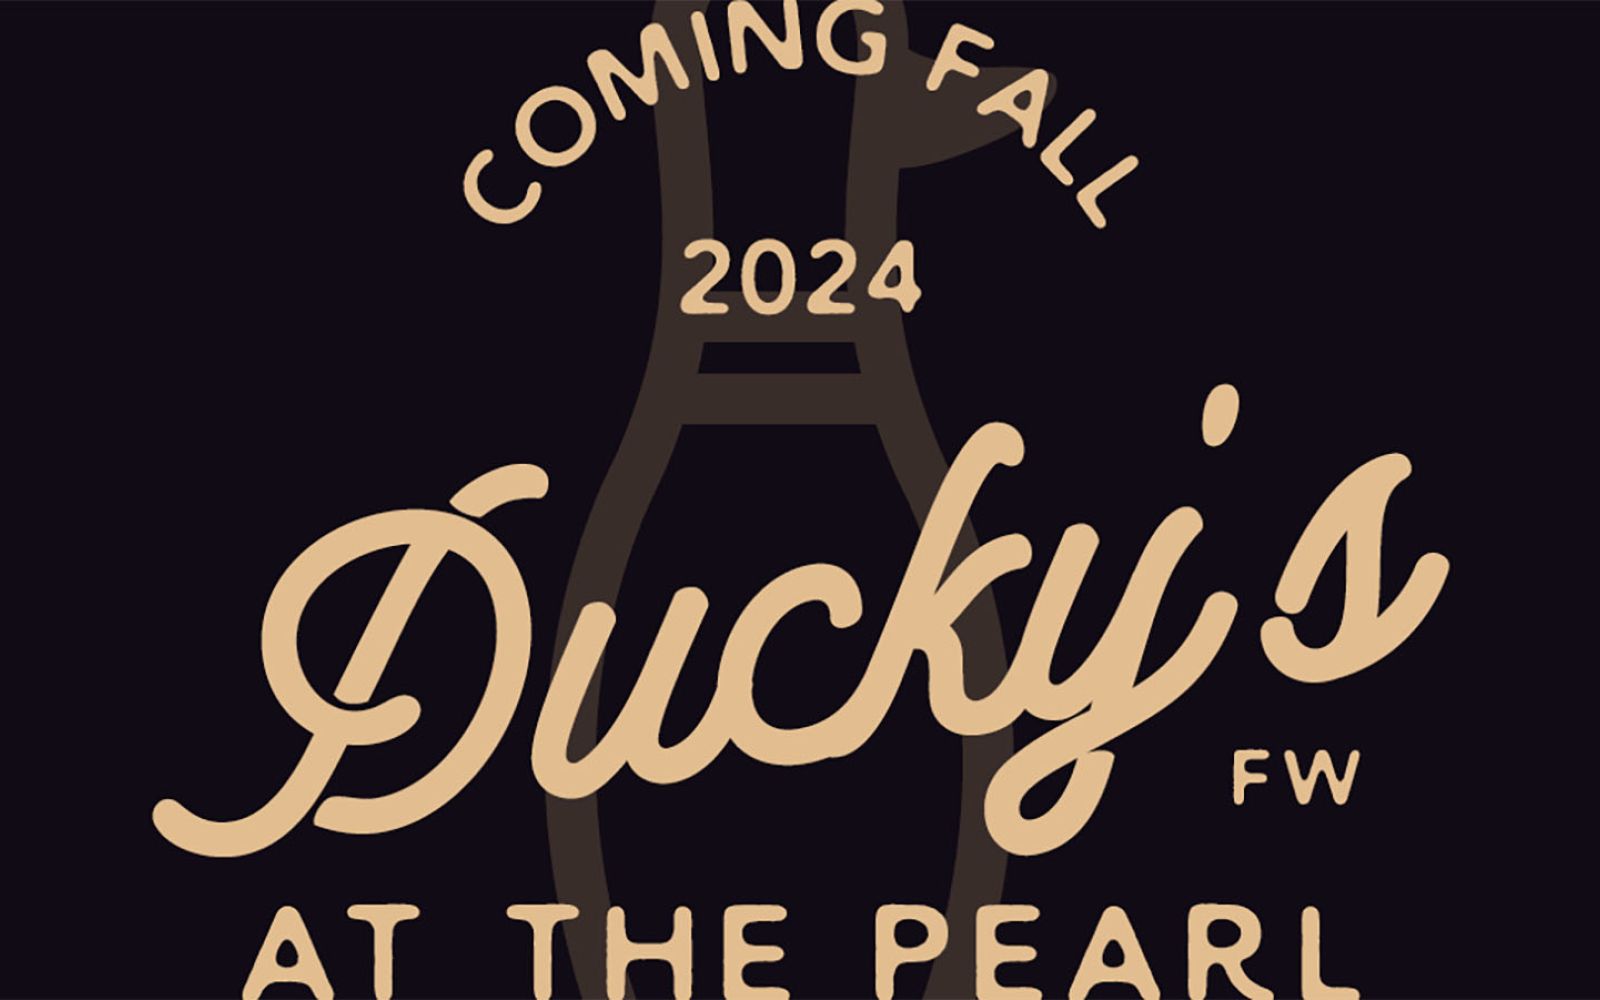 Ducky's has reserved its space at The Pearl in downtown Fort Wayne.